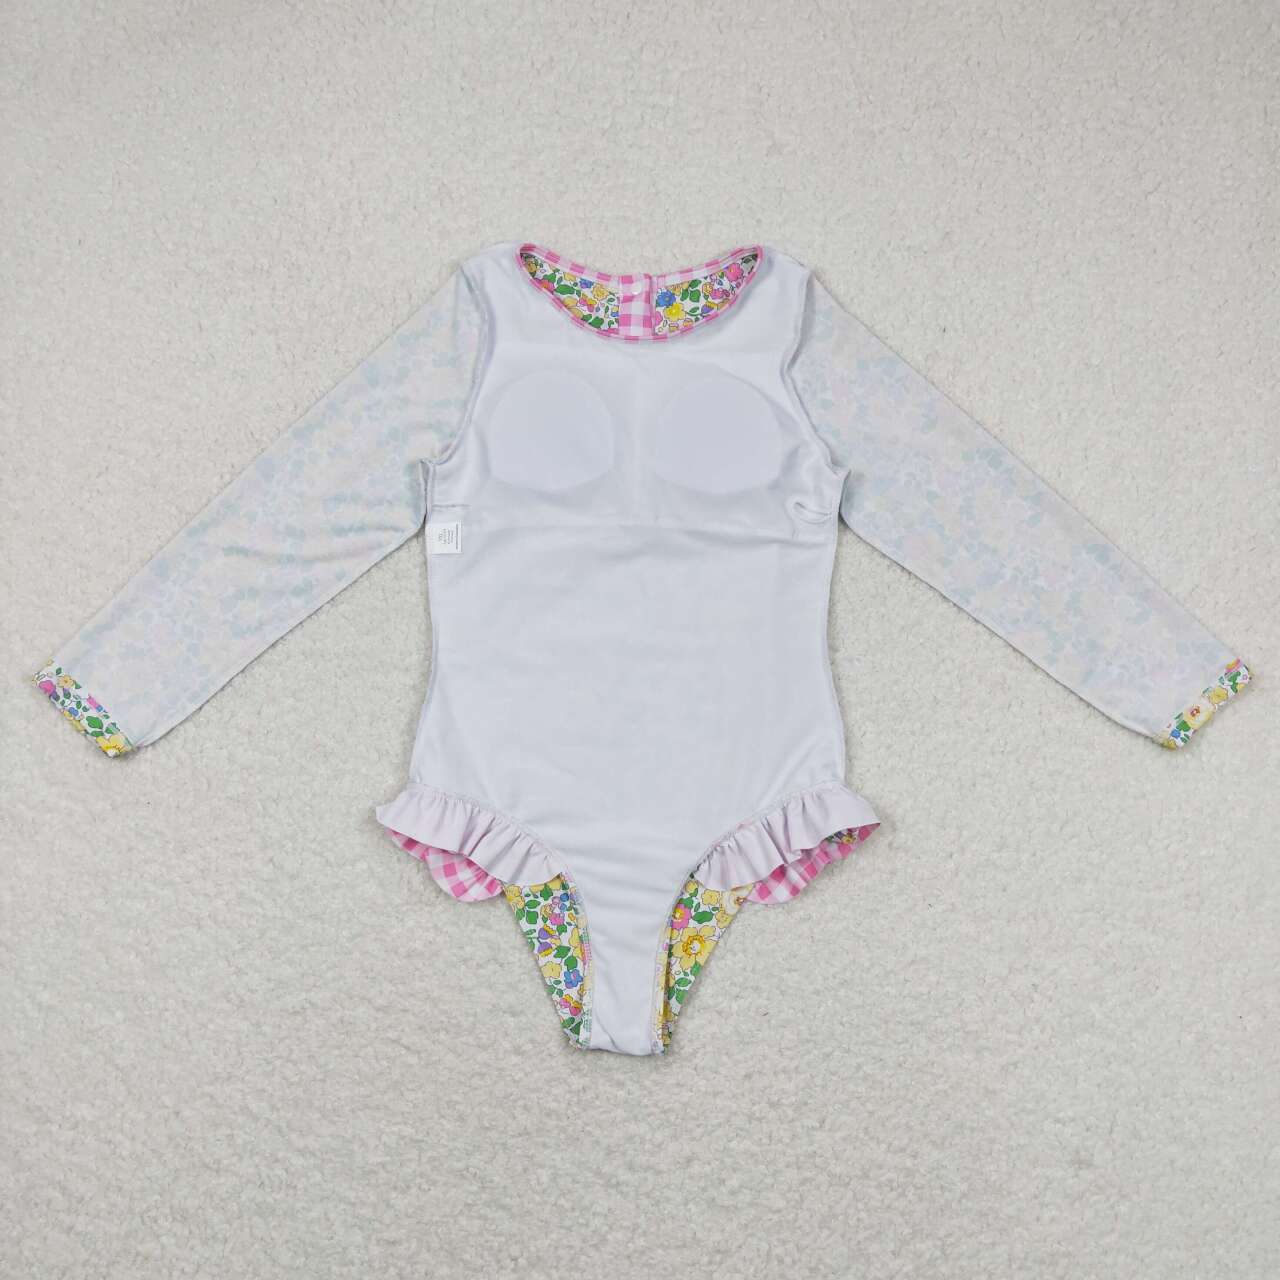 S0191 Baby Girls Floral Long Sleeve One-piece Swimsuit